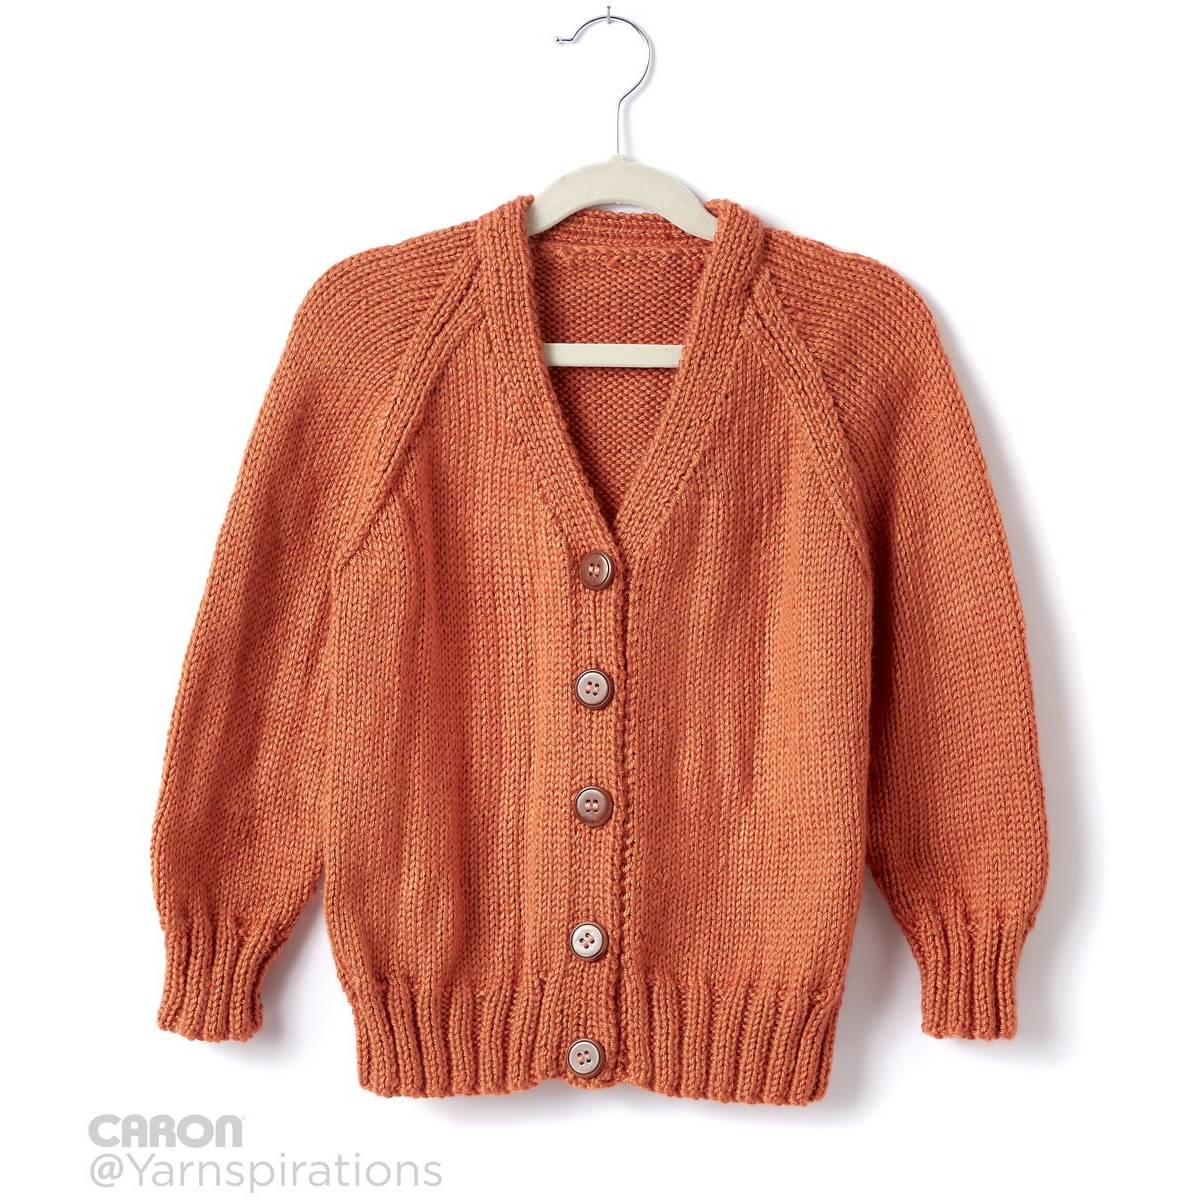 Knitting Patterns For Childrens Sweaters Free Free Pattern Caron Childs Knit V Neck Cardigan Hobcraft